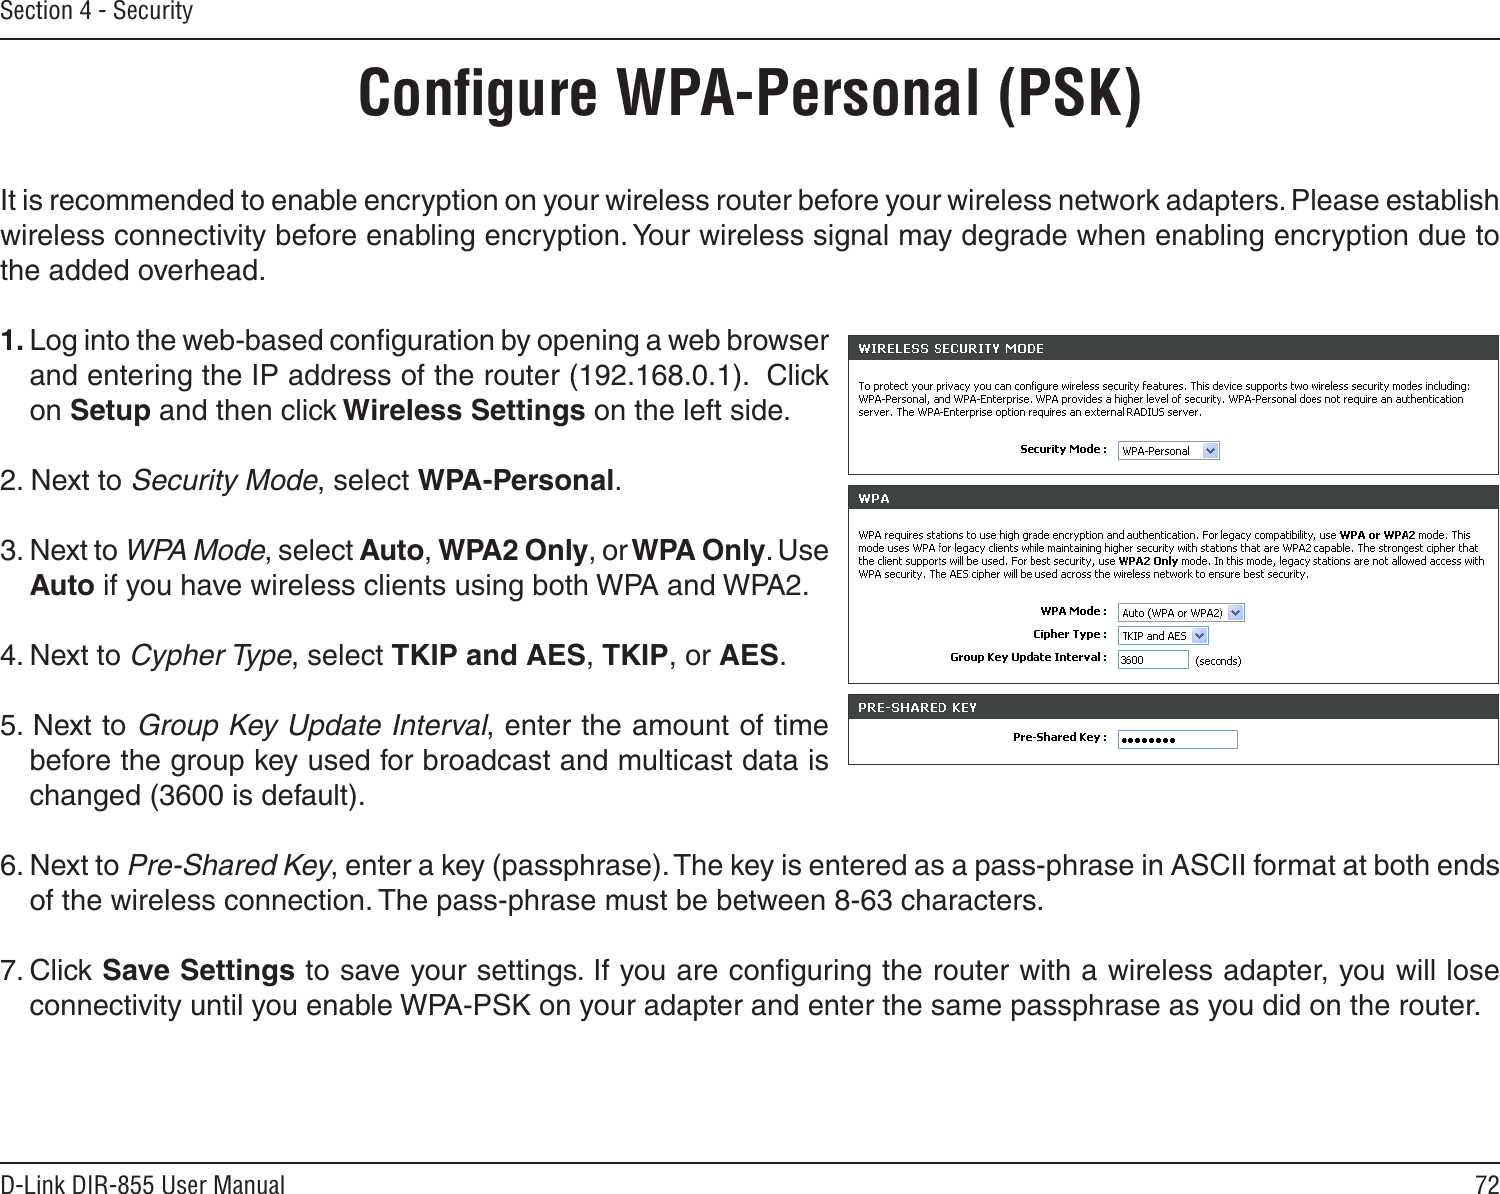 72D-Link DIR-855 User ManualSection 4 - SecurityConﬁgure WPA-Personal (PSK)It is recommended to enable encryption on your wireless router before your wireless network adapters. Please establish wireless connectivity before enabling encryption. Your wireless signal may degrade when enabling encryption due to the added overhead.1. Log into the web-based conﬁguration by opening a web browser and entering the IP address of the router (192.168.0.1).  Click on Setup and then click Wireless Settings on the left side.2. Next to Security Mode, select WPA-Personal.3. Next to WPA Mode, select Auto, WPA2 Only, or WPA Only. Use Auto if you have wireless clients using both WPA and WPA2.4. Next to Cypher Type, select TKIP and AES, TKIP, or AES.5. Next to Group Key Update Interval, enter the amount of time before the group key used for broadcast and multicast data is changed (3600 is default).6. Next to Pre-Shared Key, enter a key (passphrase). The key is entered as a pass-phrase in ASCII format at both ends of the wireless connection. The pass-phrase must be between 8-63 characters. 7. Click Save Settings to save your settings. If you are conﬁguring the router with a wireless adapter, you will lose connectivity until you enable WPA-PSK on your adapter and enter the same passphrase as you did on the router.